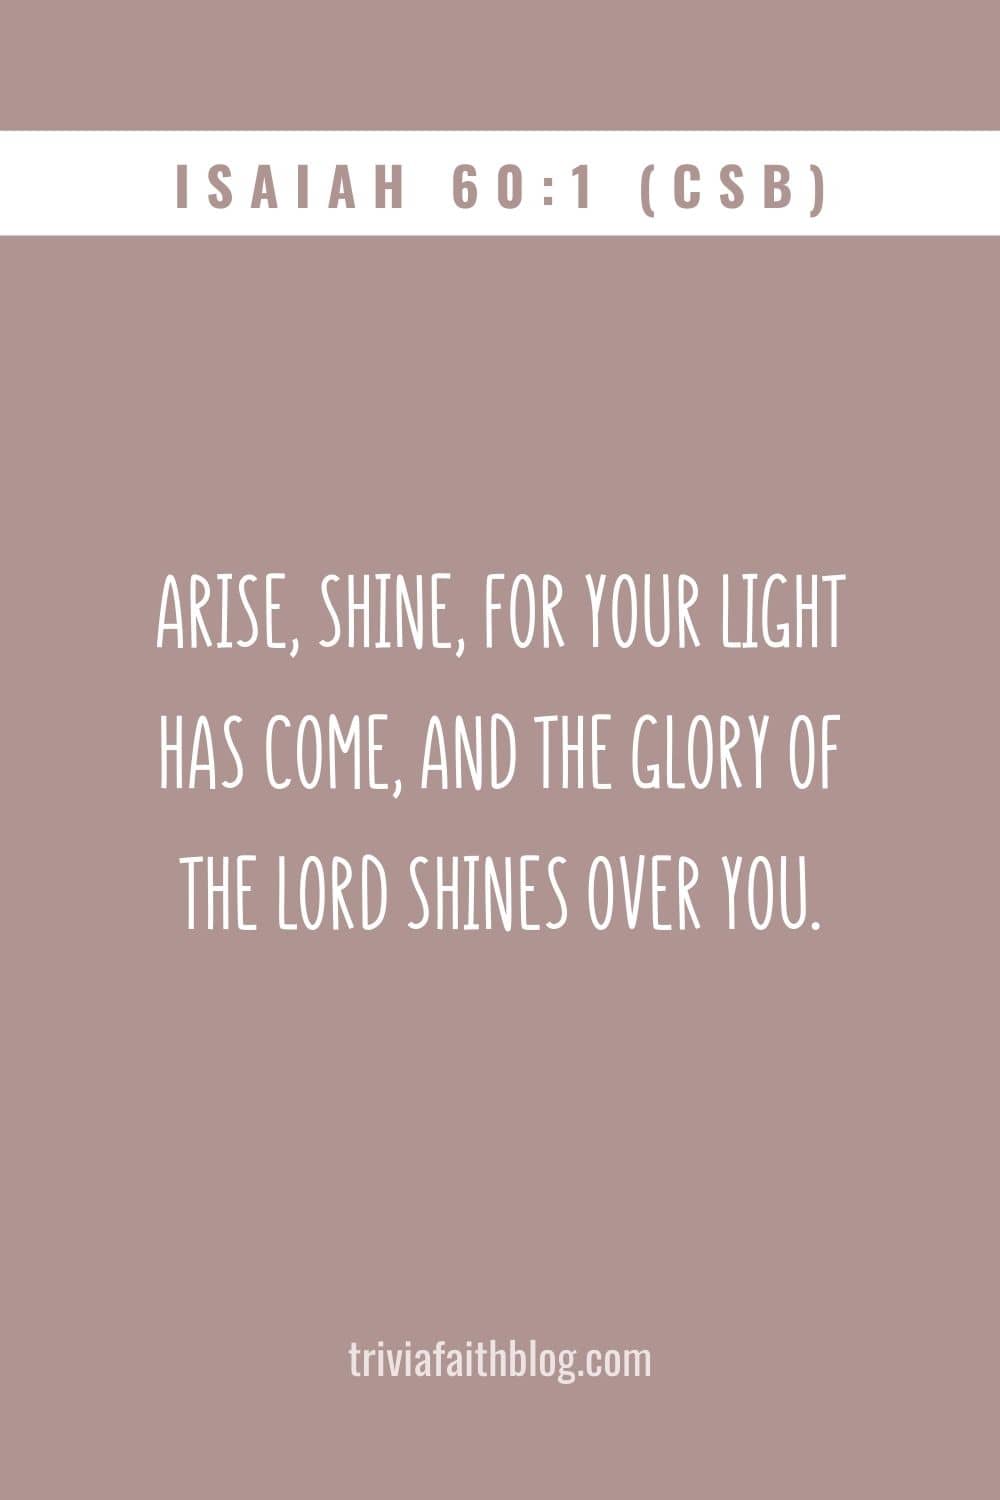 Arise, shine, for your light has come, and the glory of the LORD shines over you